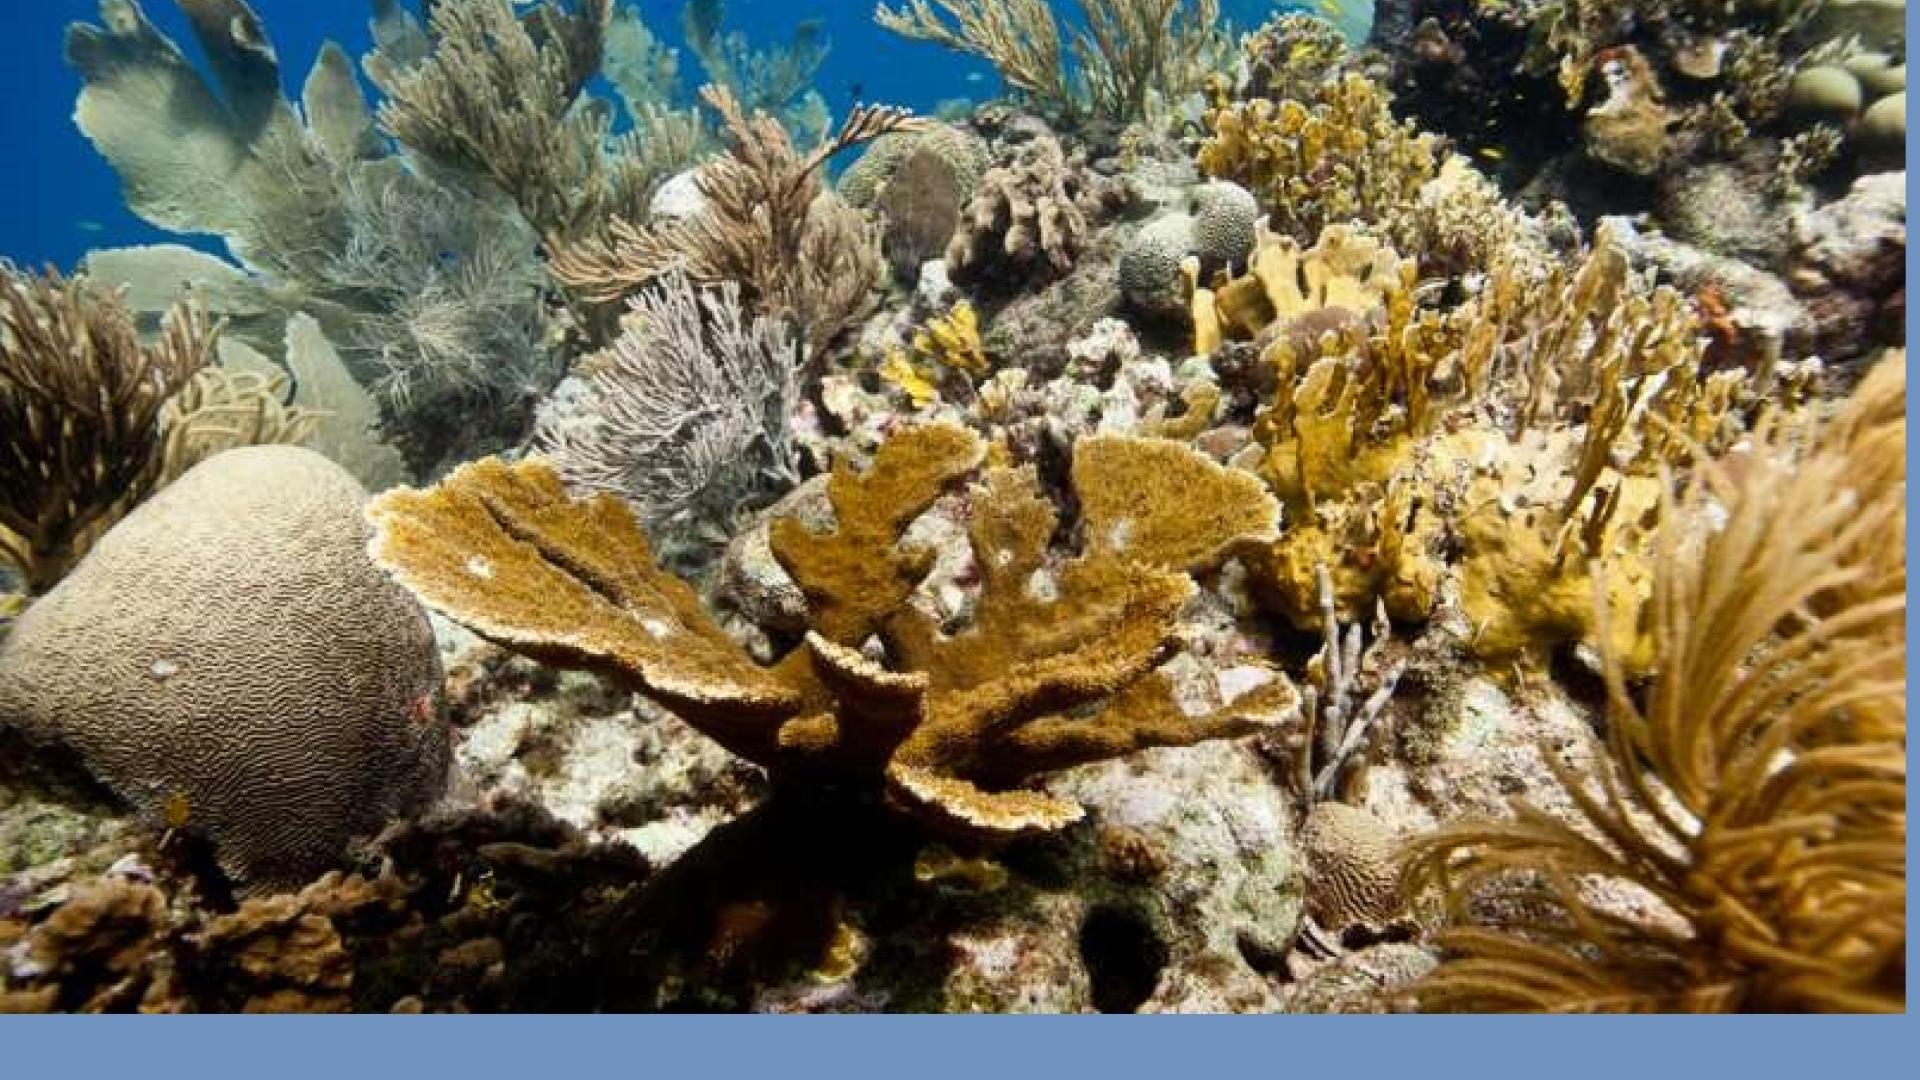 New UN Multi-Partner Trust Fund for Coral Reefs | United Nations Development Programme